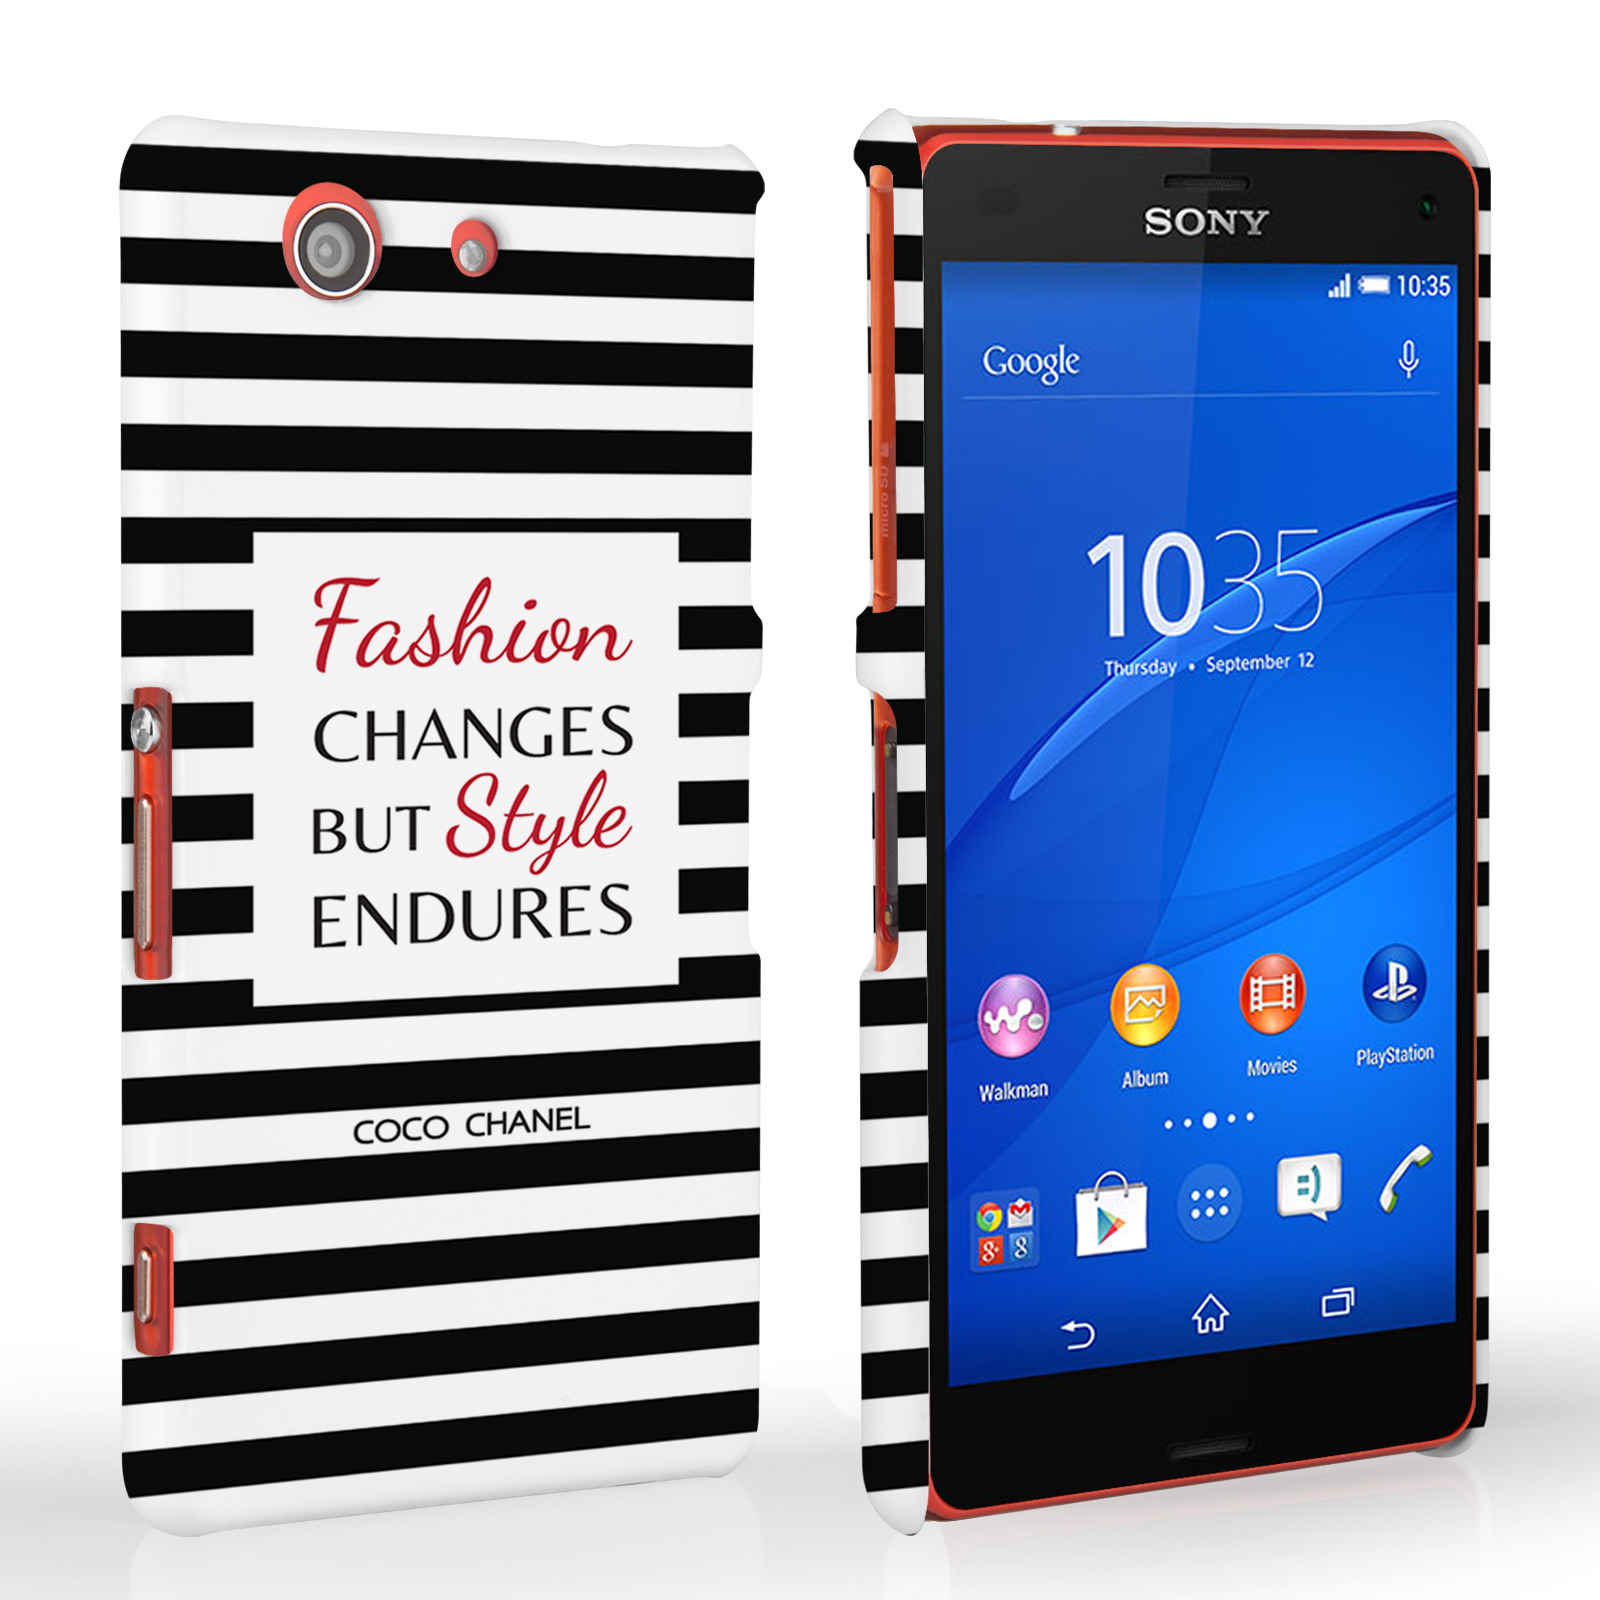 Caseflex Sony Xperia Z3 Compact Chanel ‘Fashion Changes’ Quote Case – Black and White